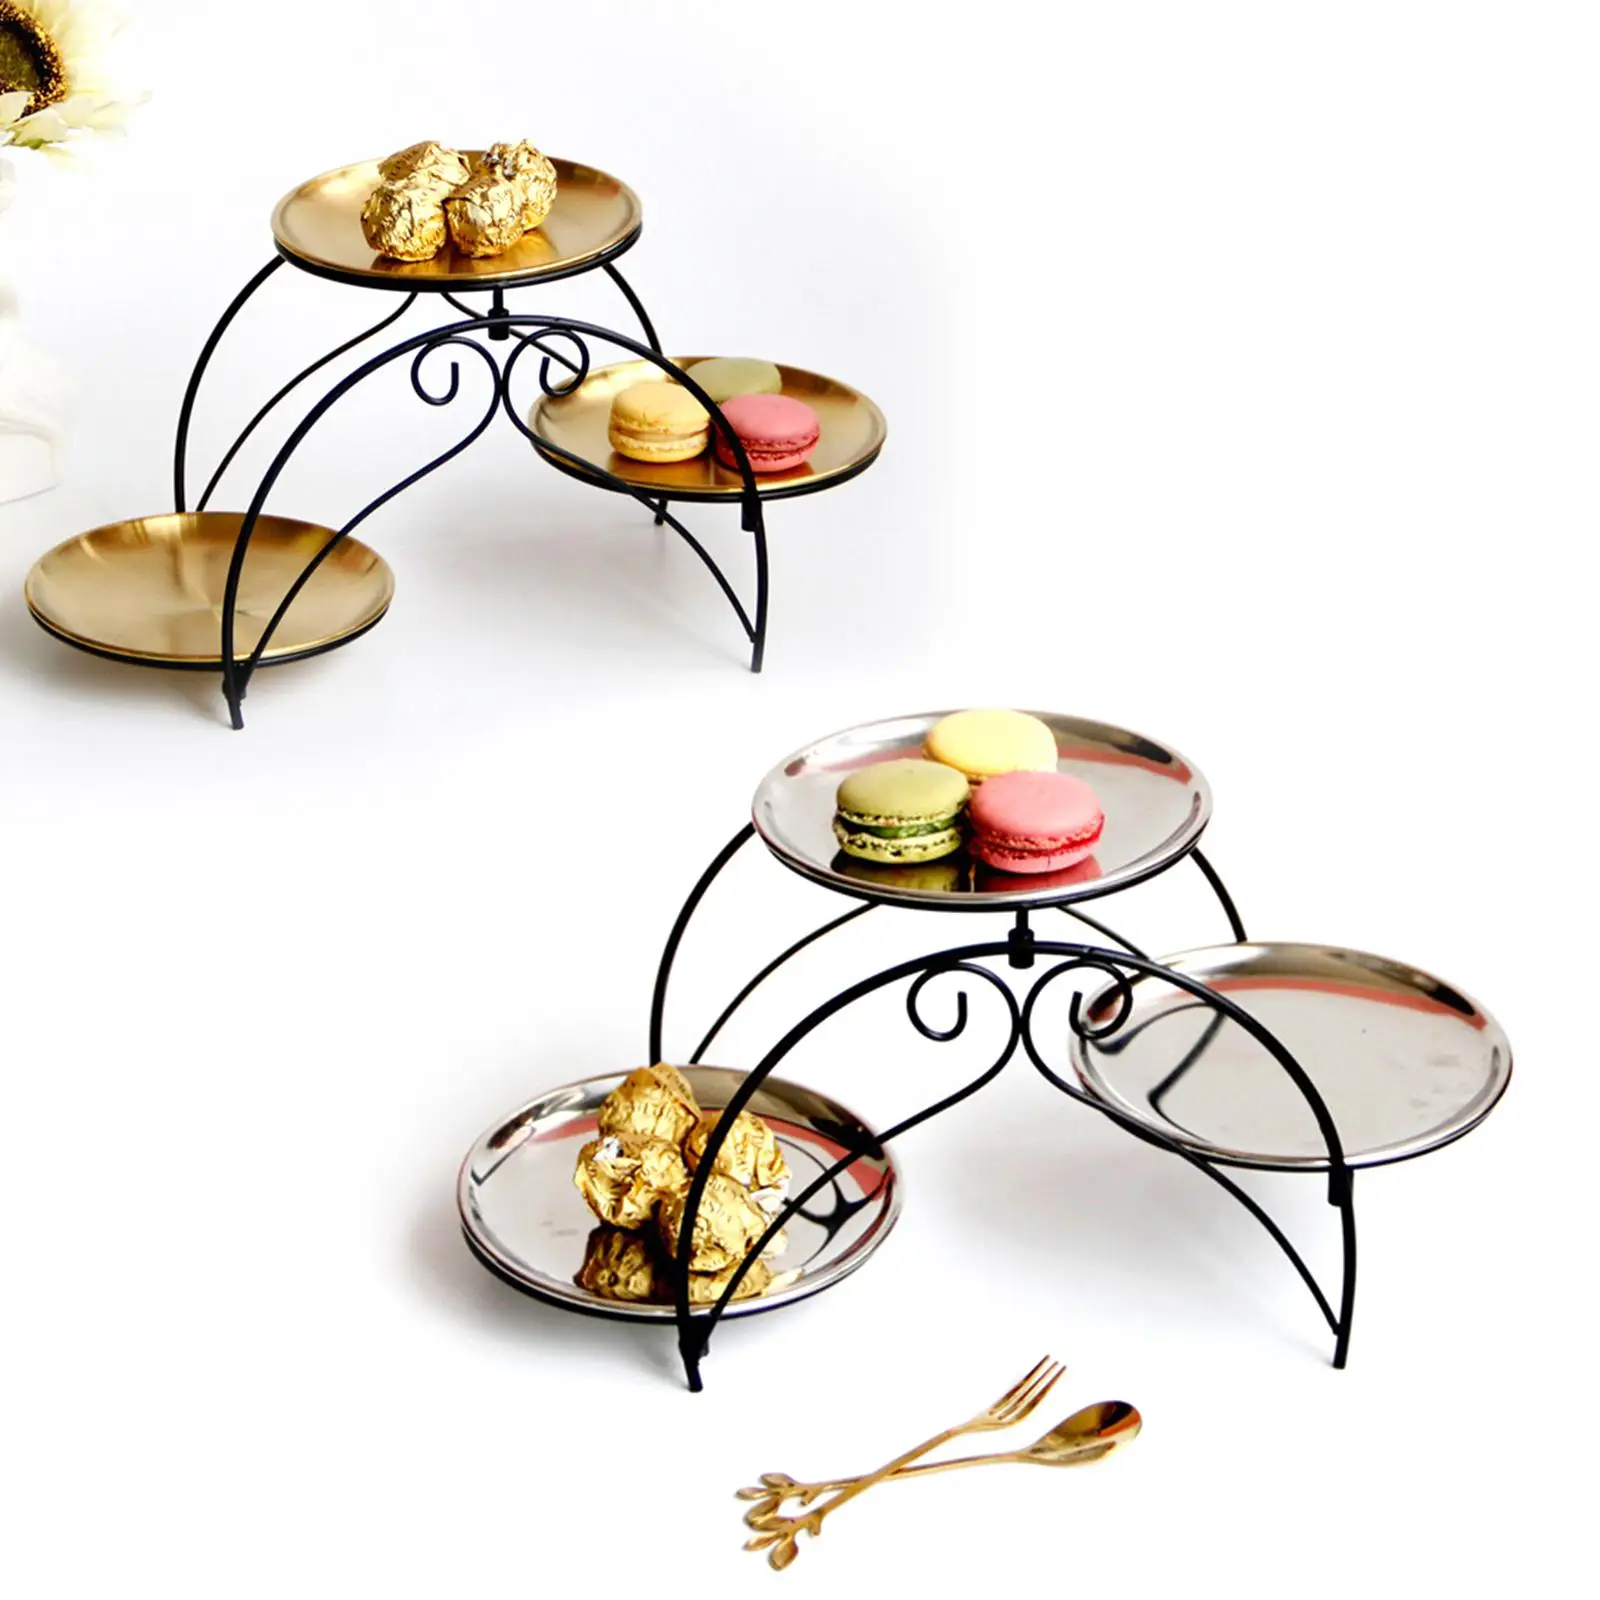 European Style 3 Layer Serving Platter Removable Reusable Arch Shaped Cupcake Stand Dessert Tray for Entertaining Party Wedding